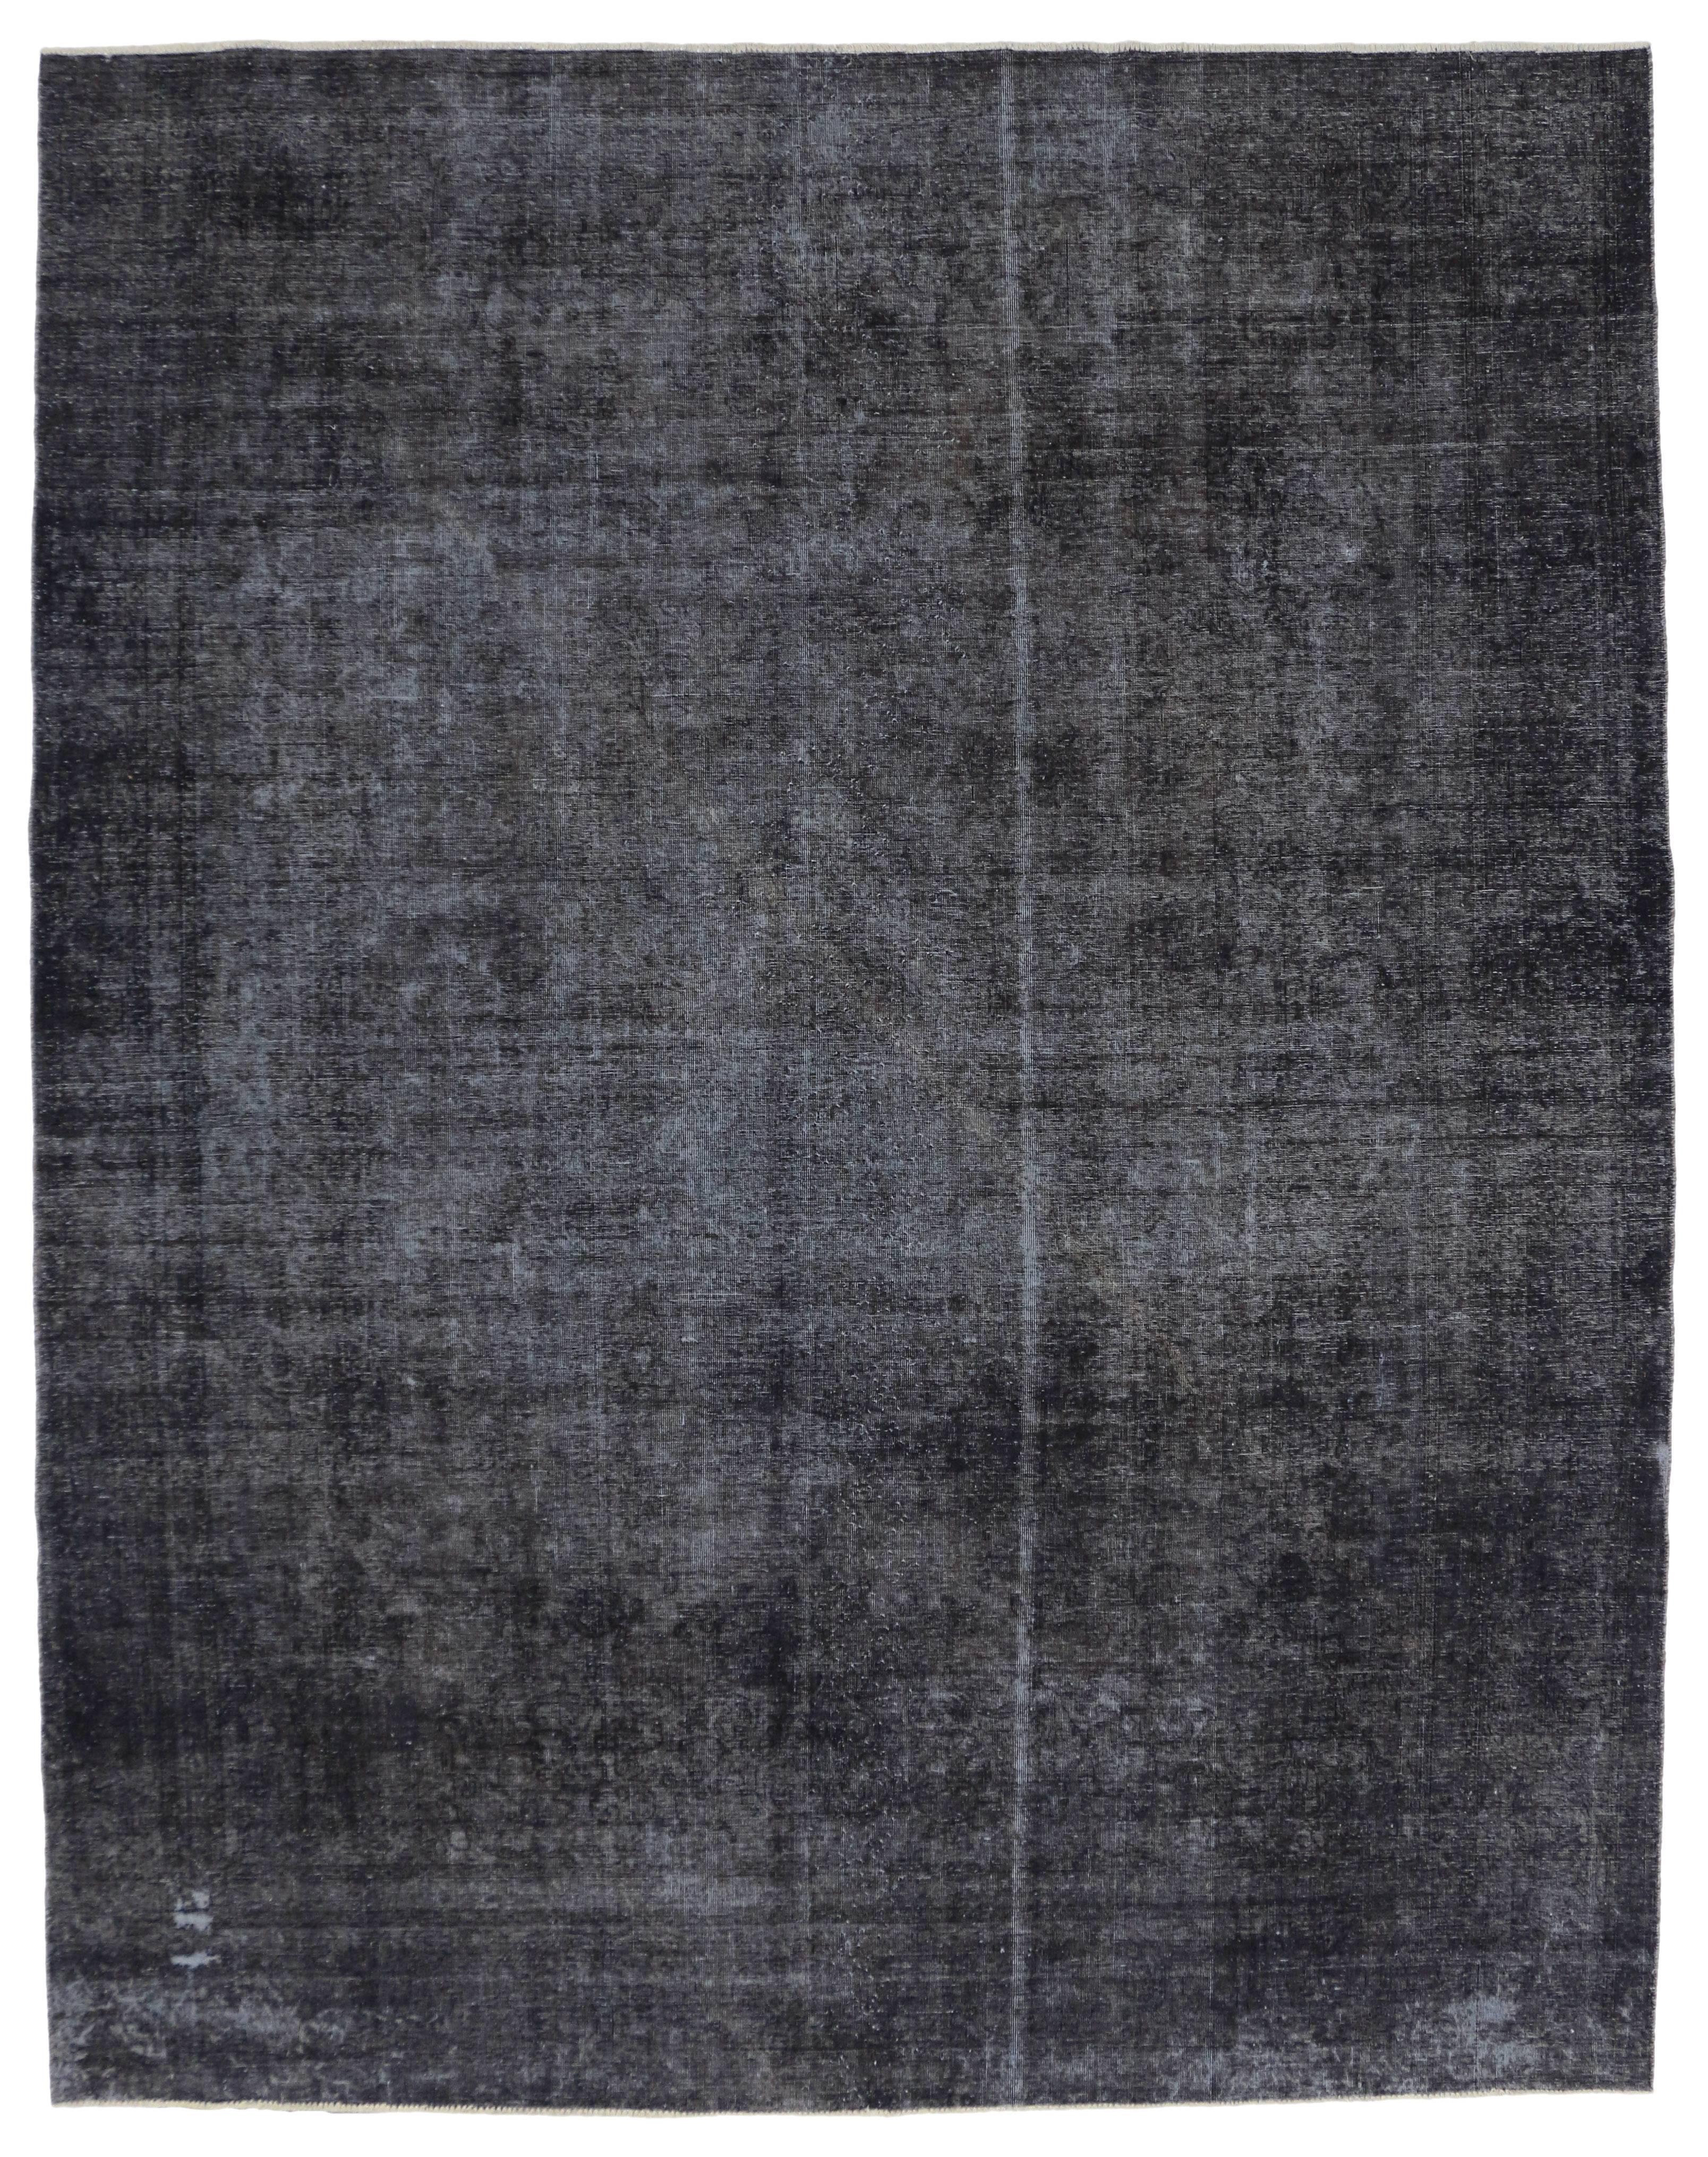 Distressed Antique Persian Charcoal Overdyed Rug with Modern Industrial Style 1